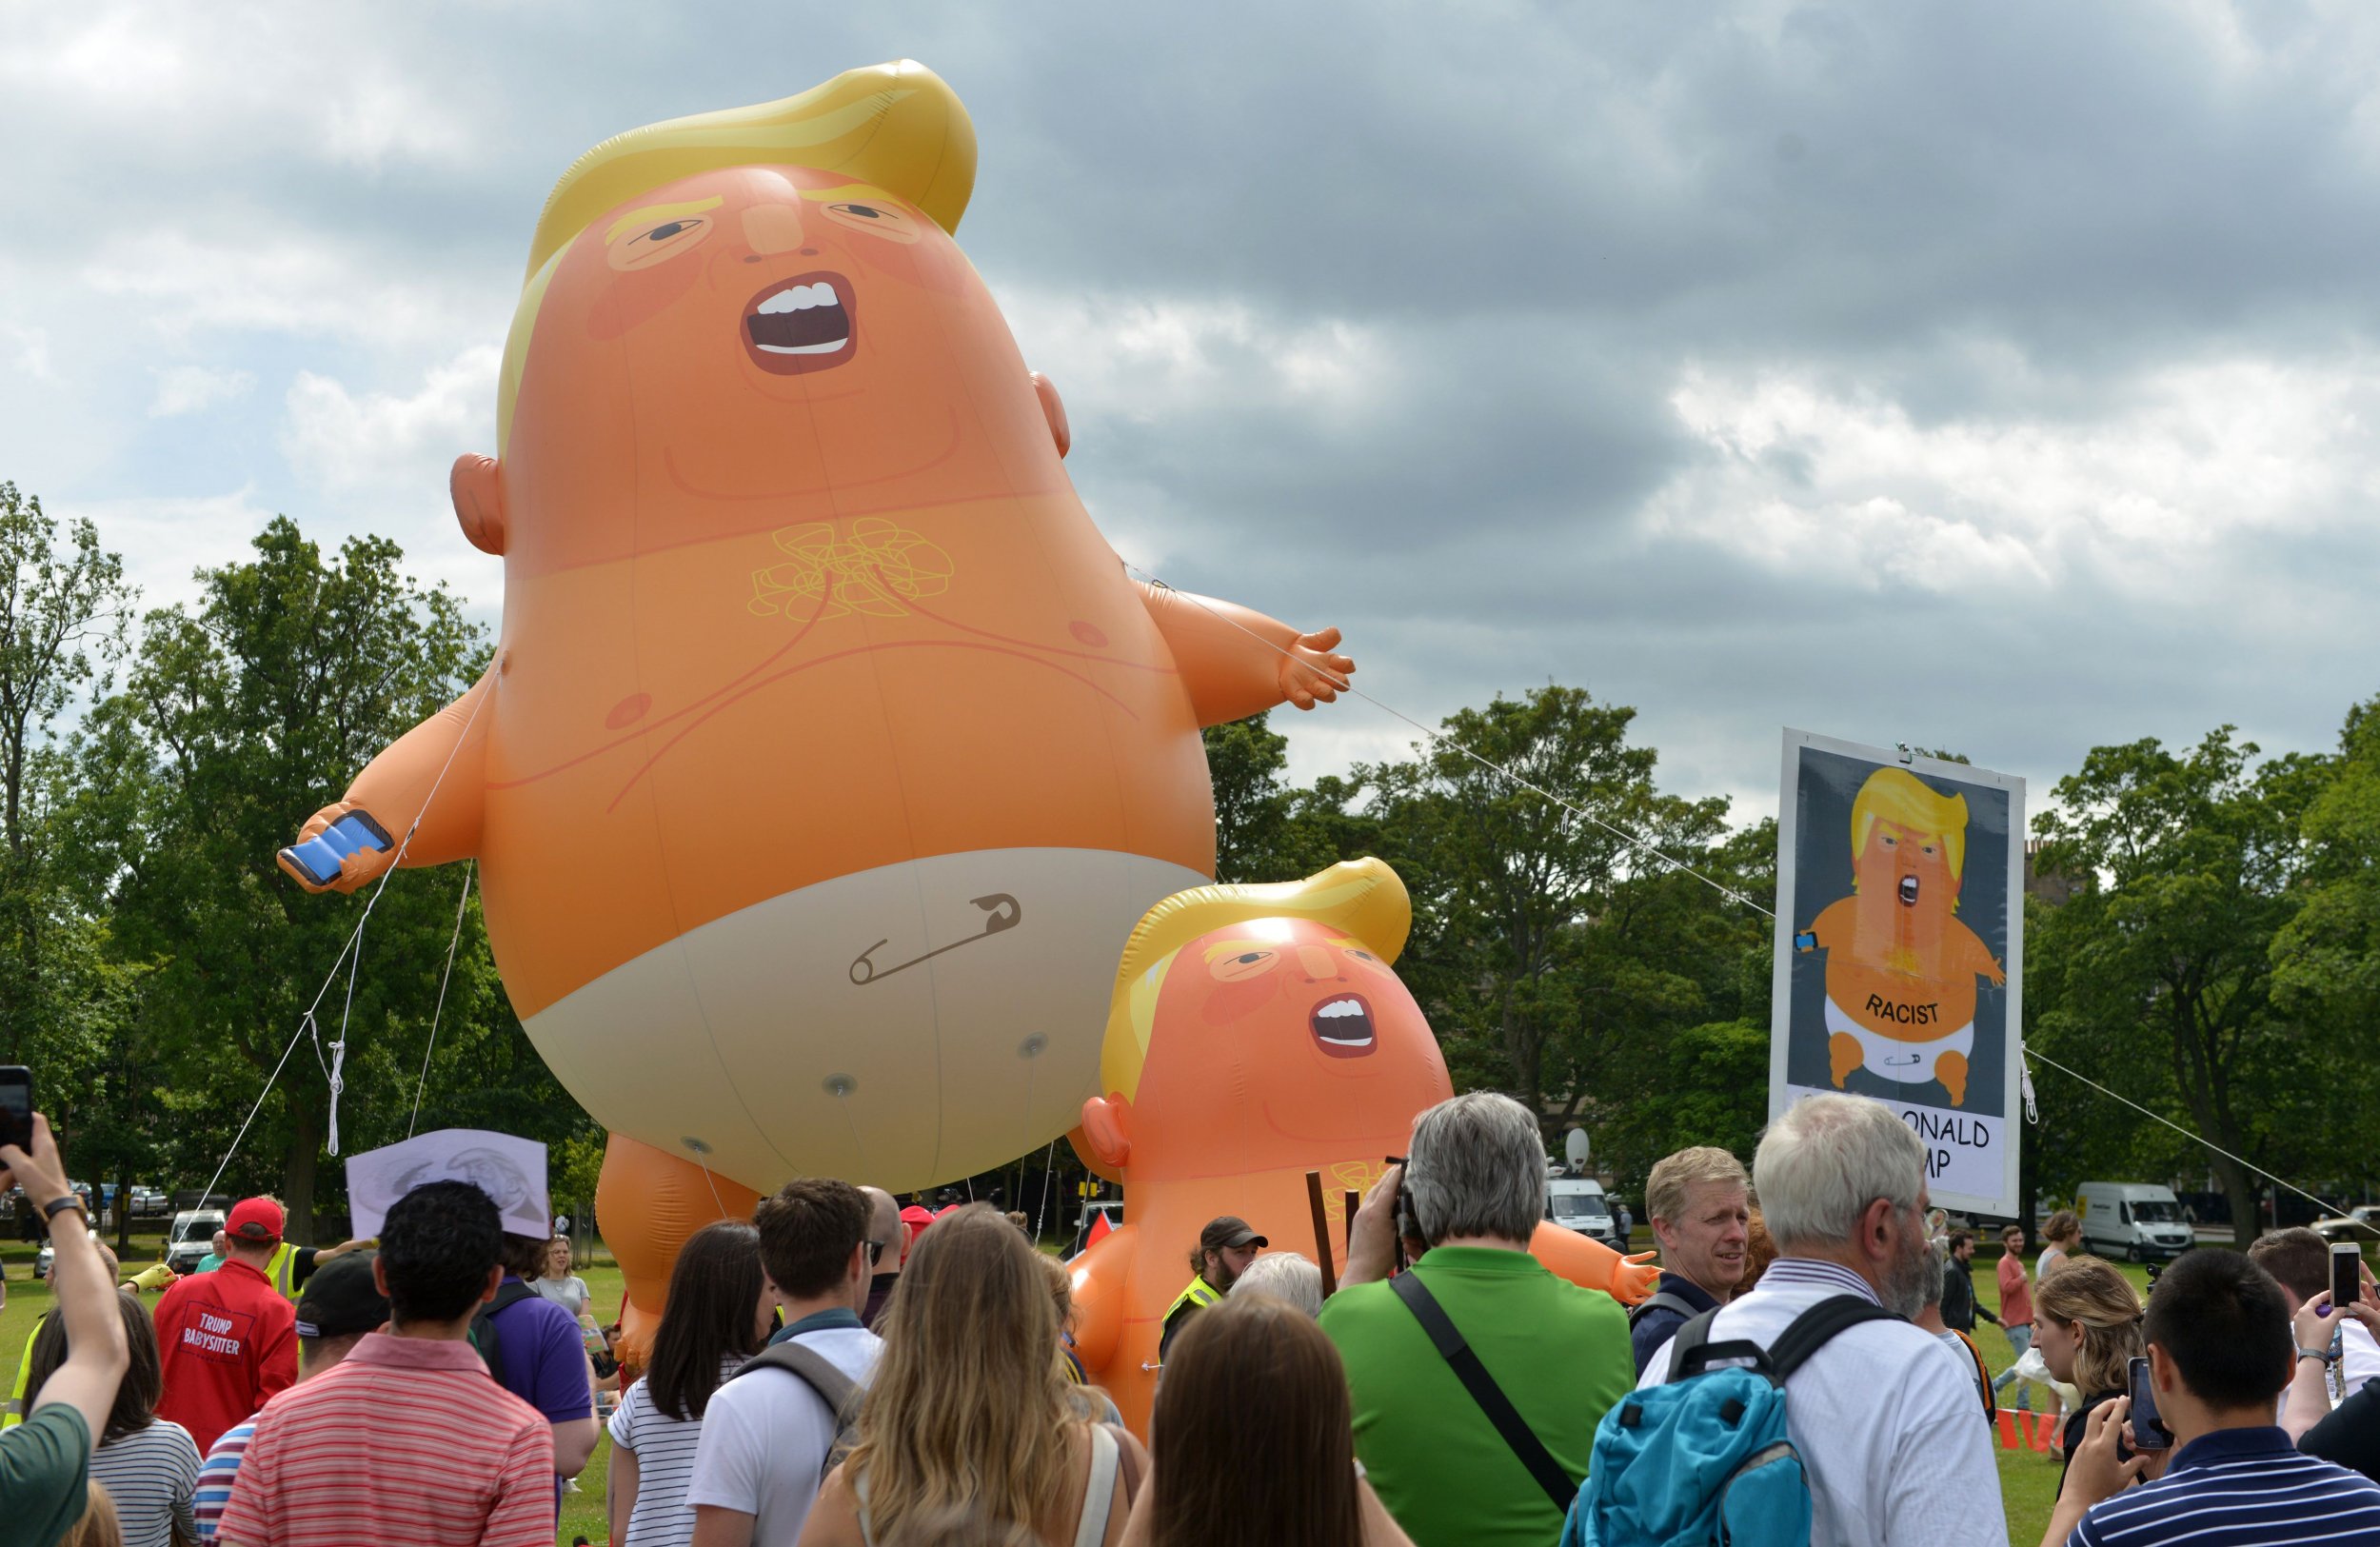 Baby Trump Balloon Appears at Rally in Florida